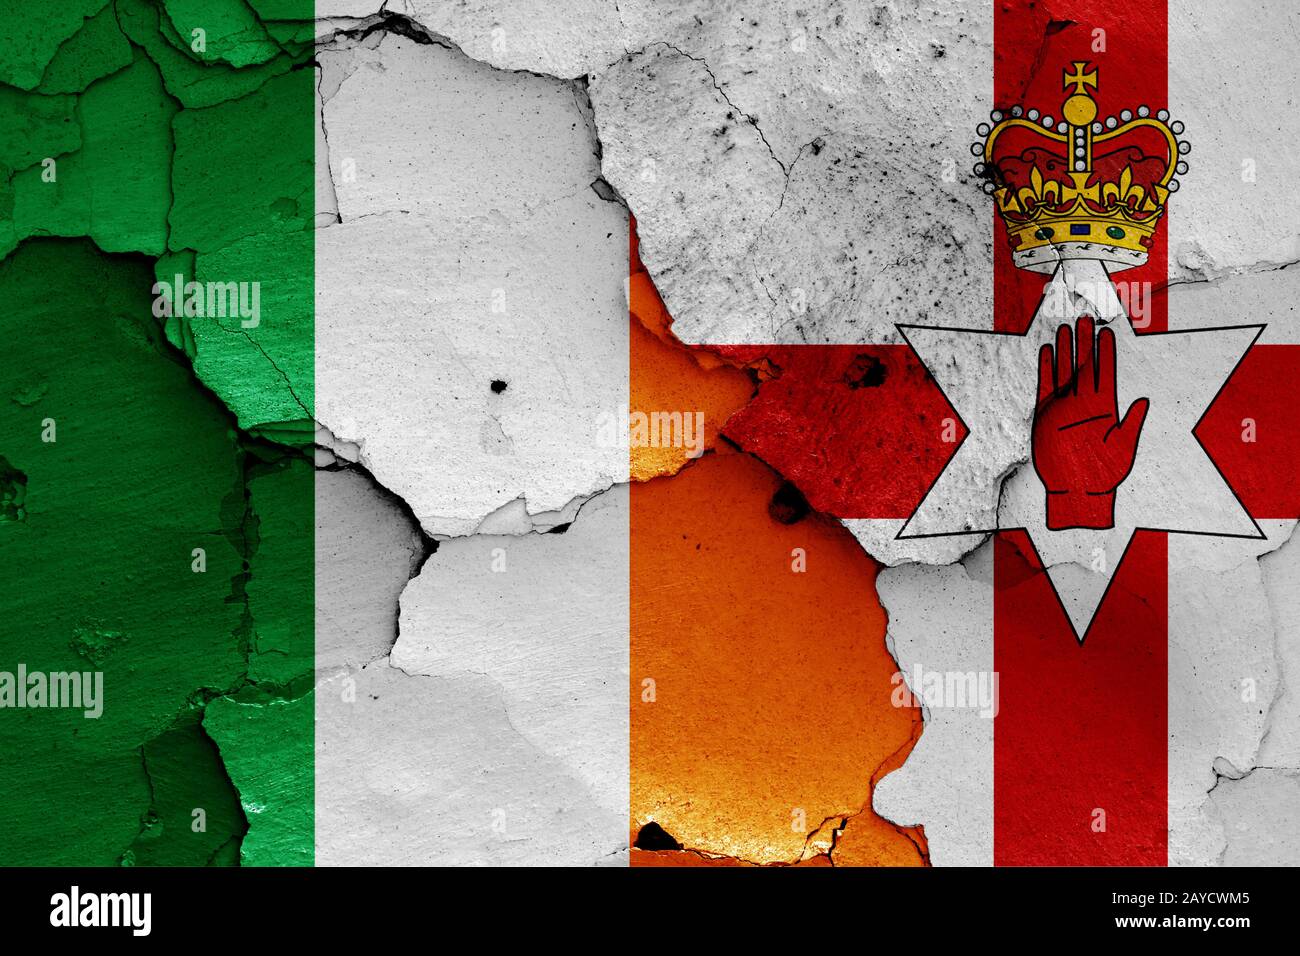 flags of Ireland and Northern Ireland painted on cracked wall Stock Photo